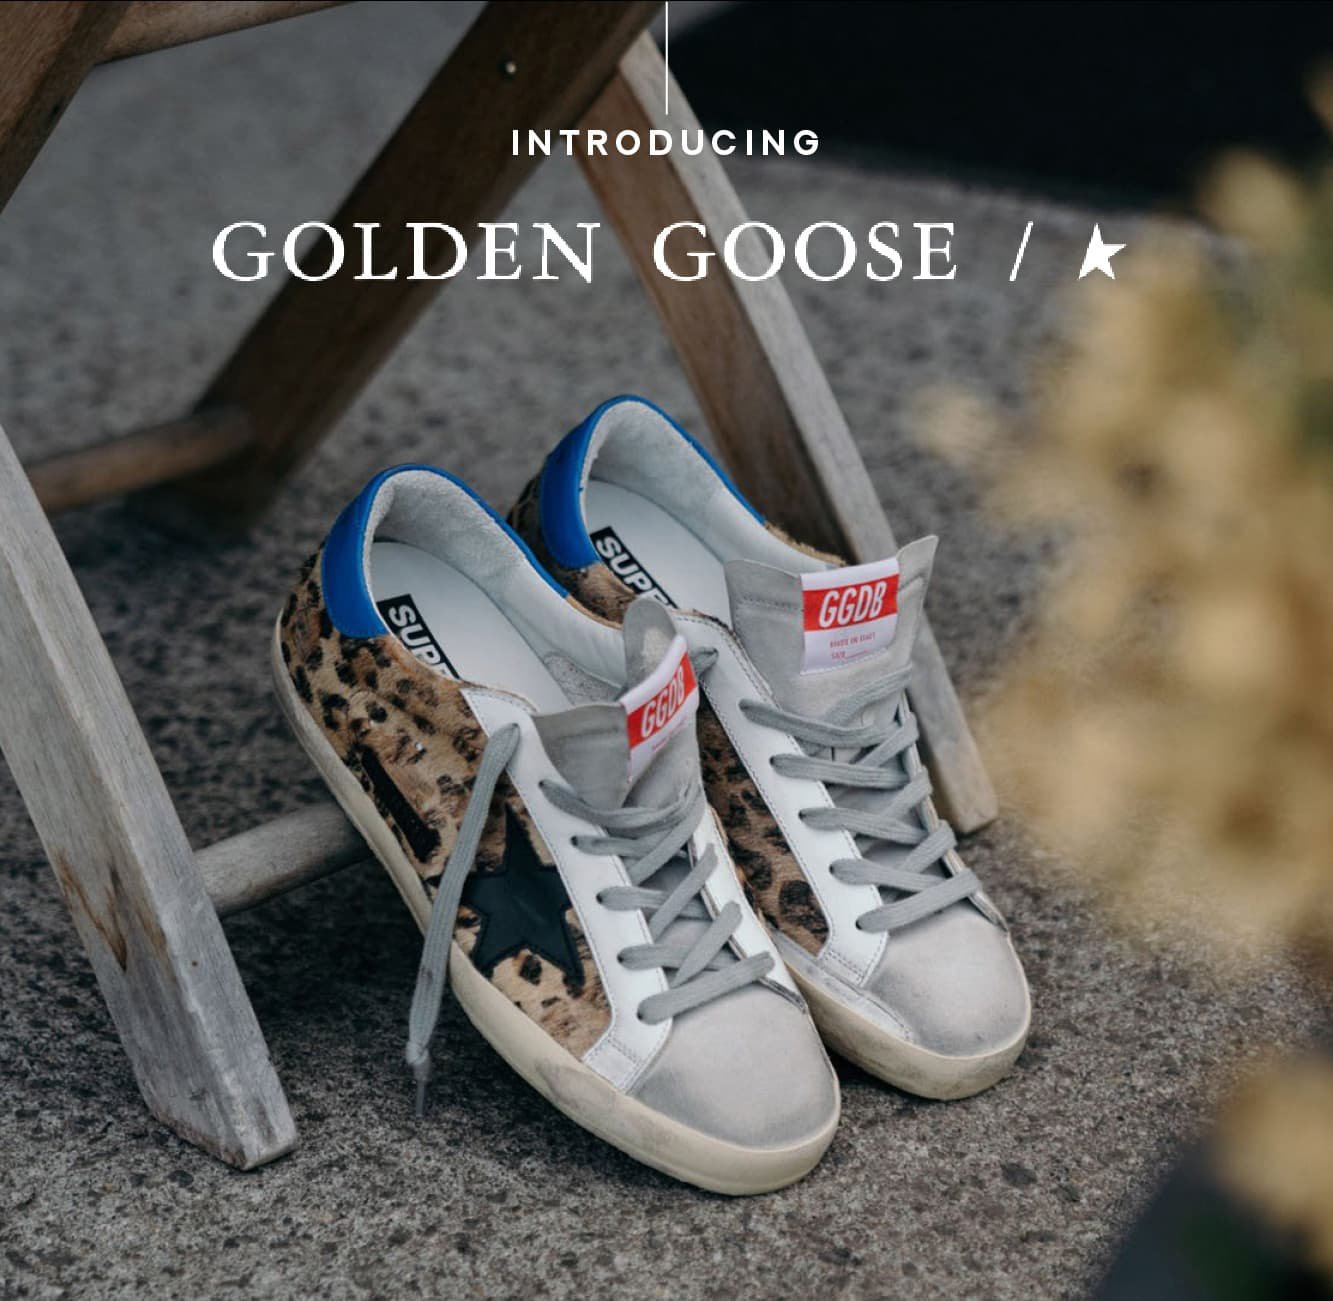 The New Trend: Introducing GOLDEN GOOSE 